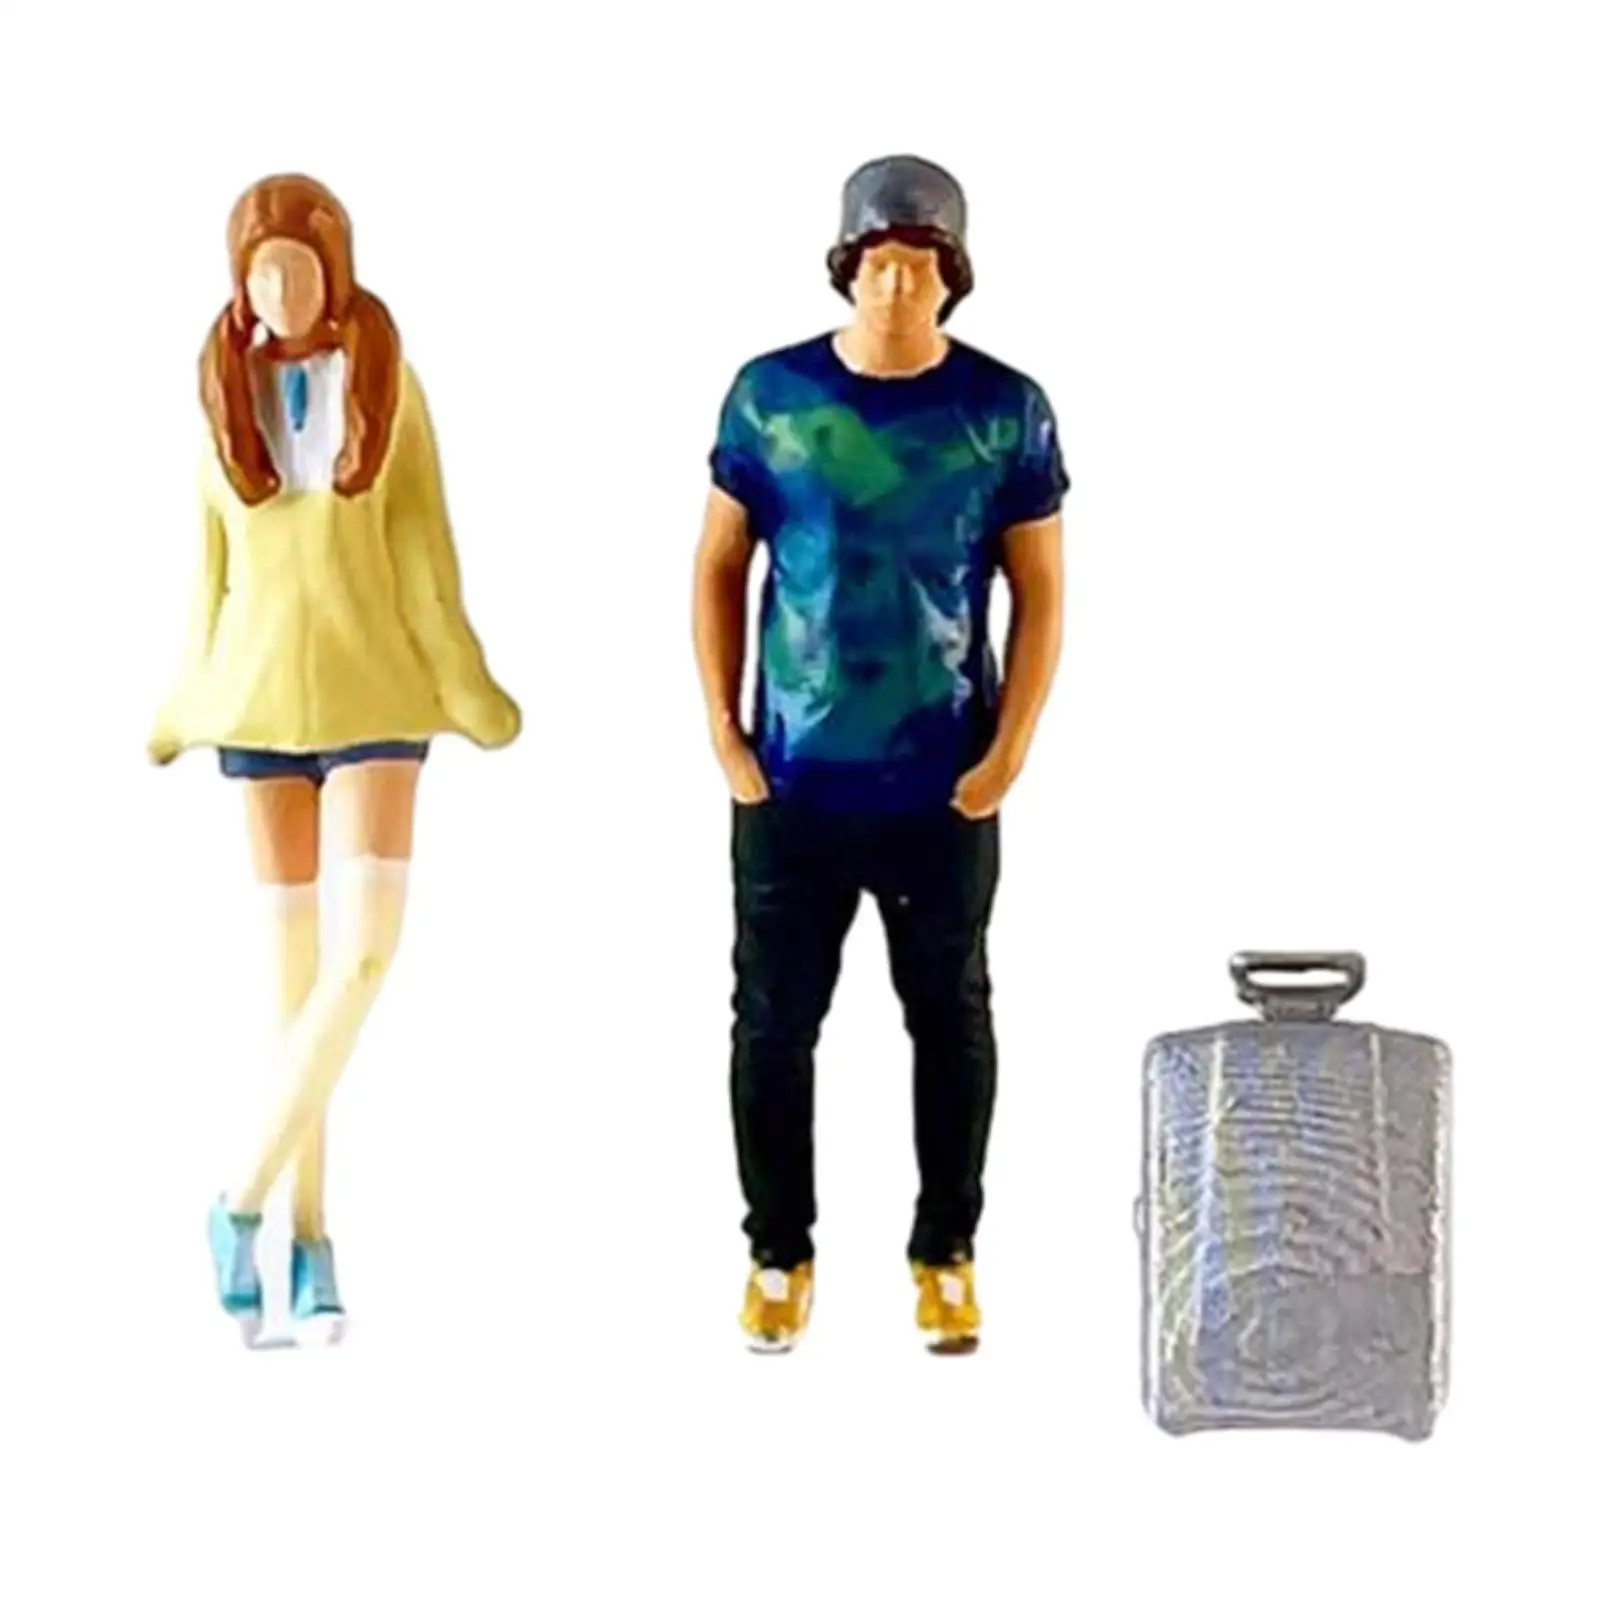 3Pcs 1/64 Boy and Girl Figures with Suitcase Model DIY Projects Dioramas